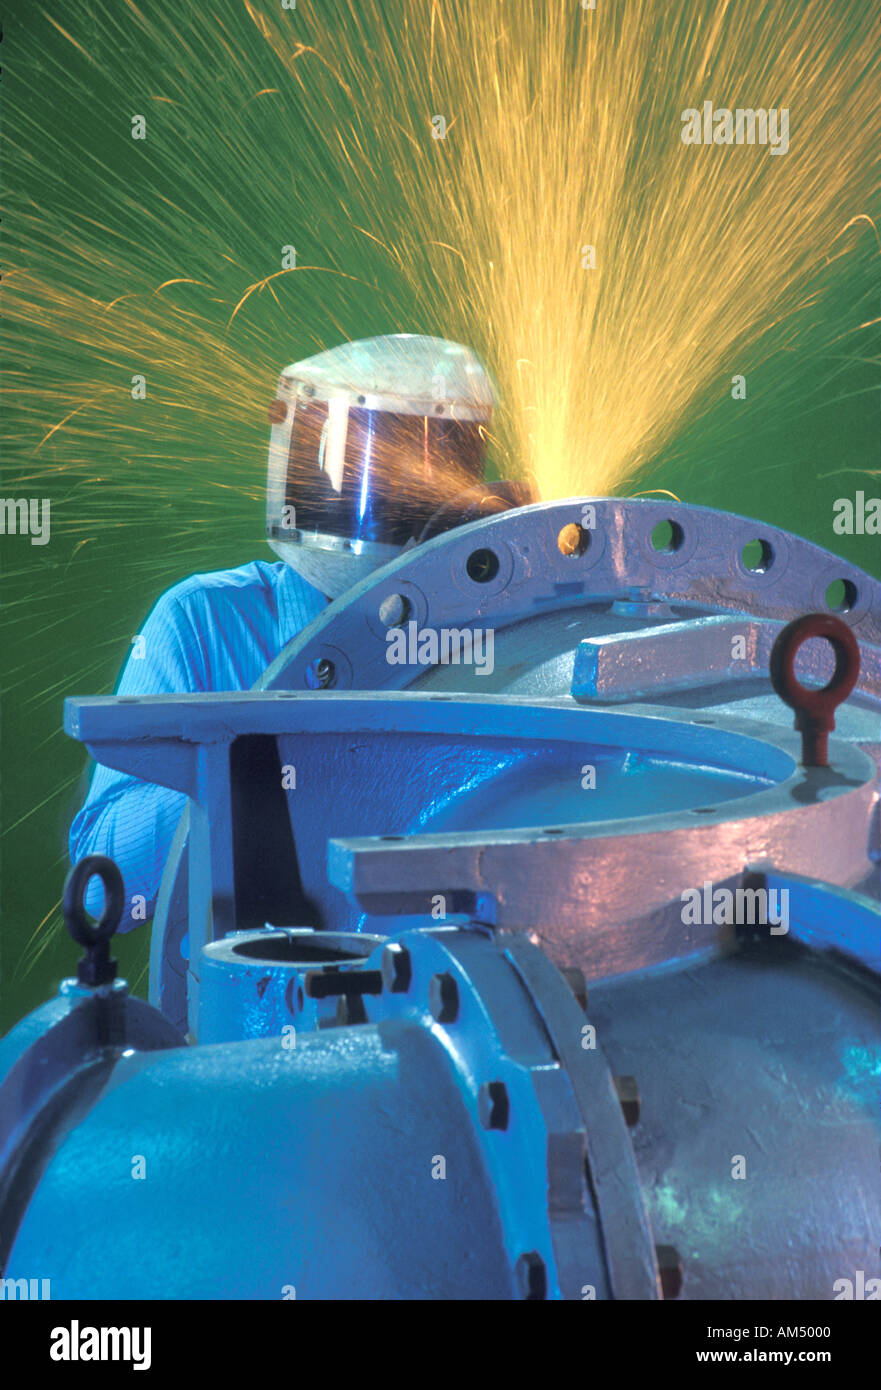 man grinding on an industrial metal pipe fabrication Stock Photo